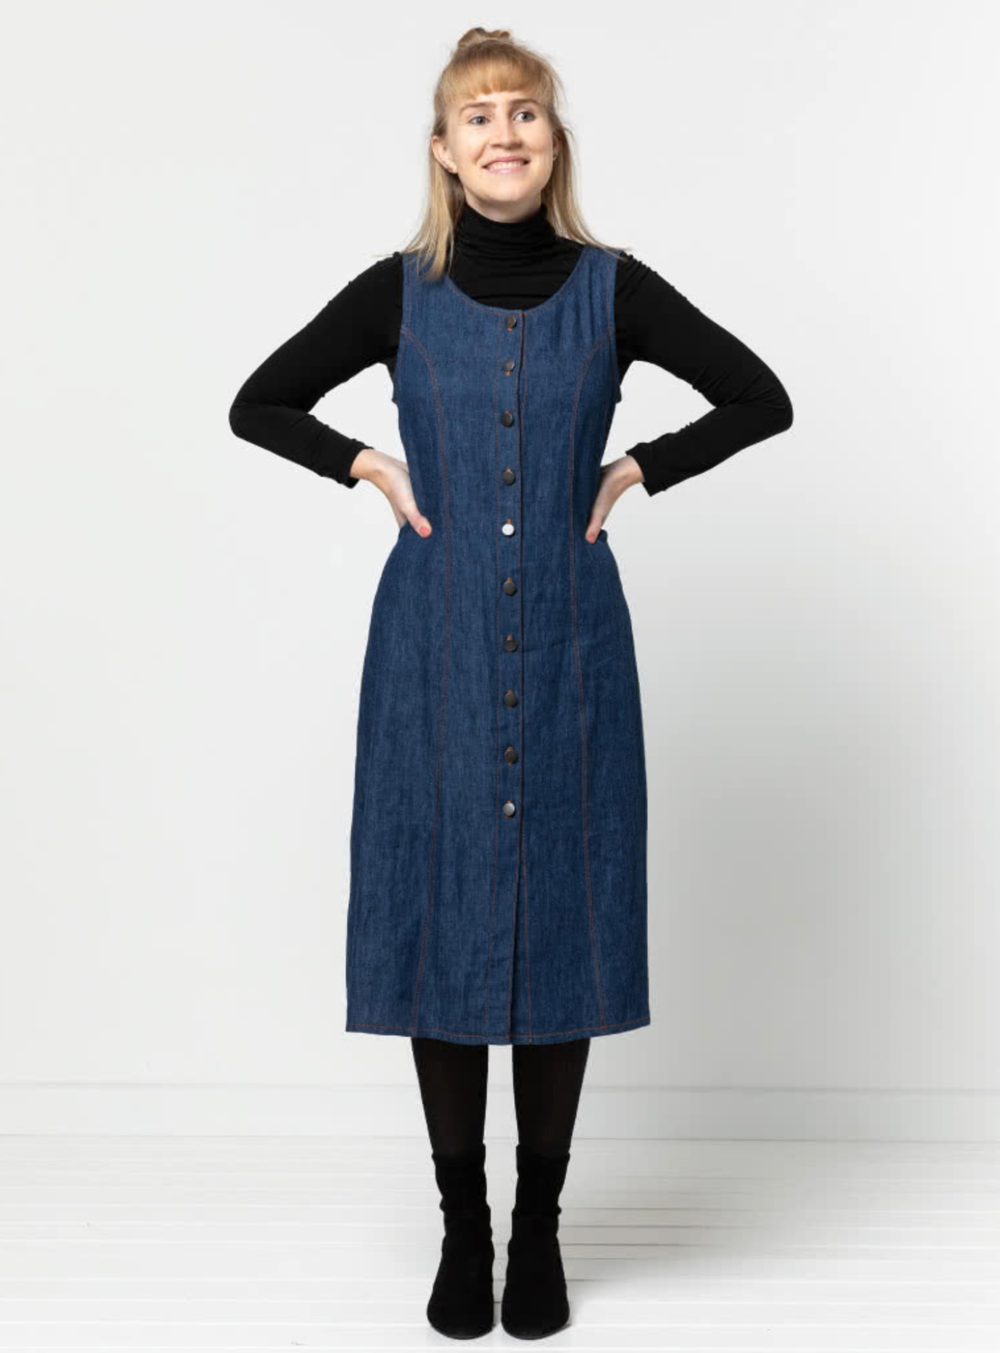 Woman wearing the Geri Dress sewing pattern from Style Arc on The Fold Line. A pinafore dress pattern made in light denim, cord, light wool, or cotton drill fabrics, featuring front and back princess seams, round neck, front button closure and mid-calf le